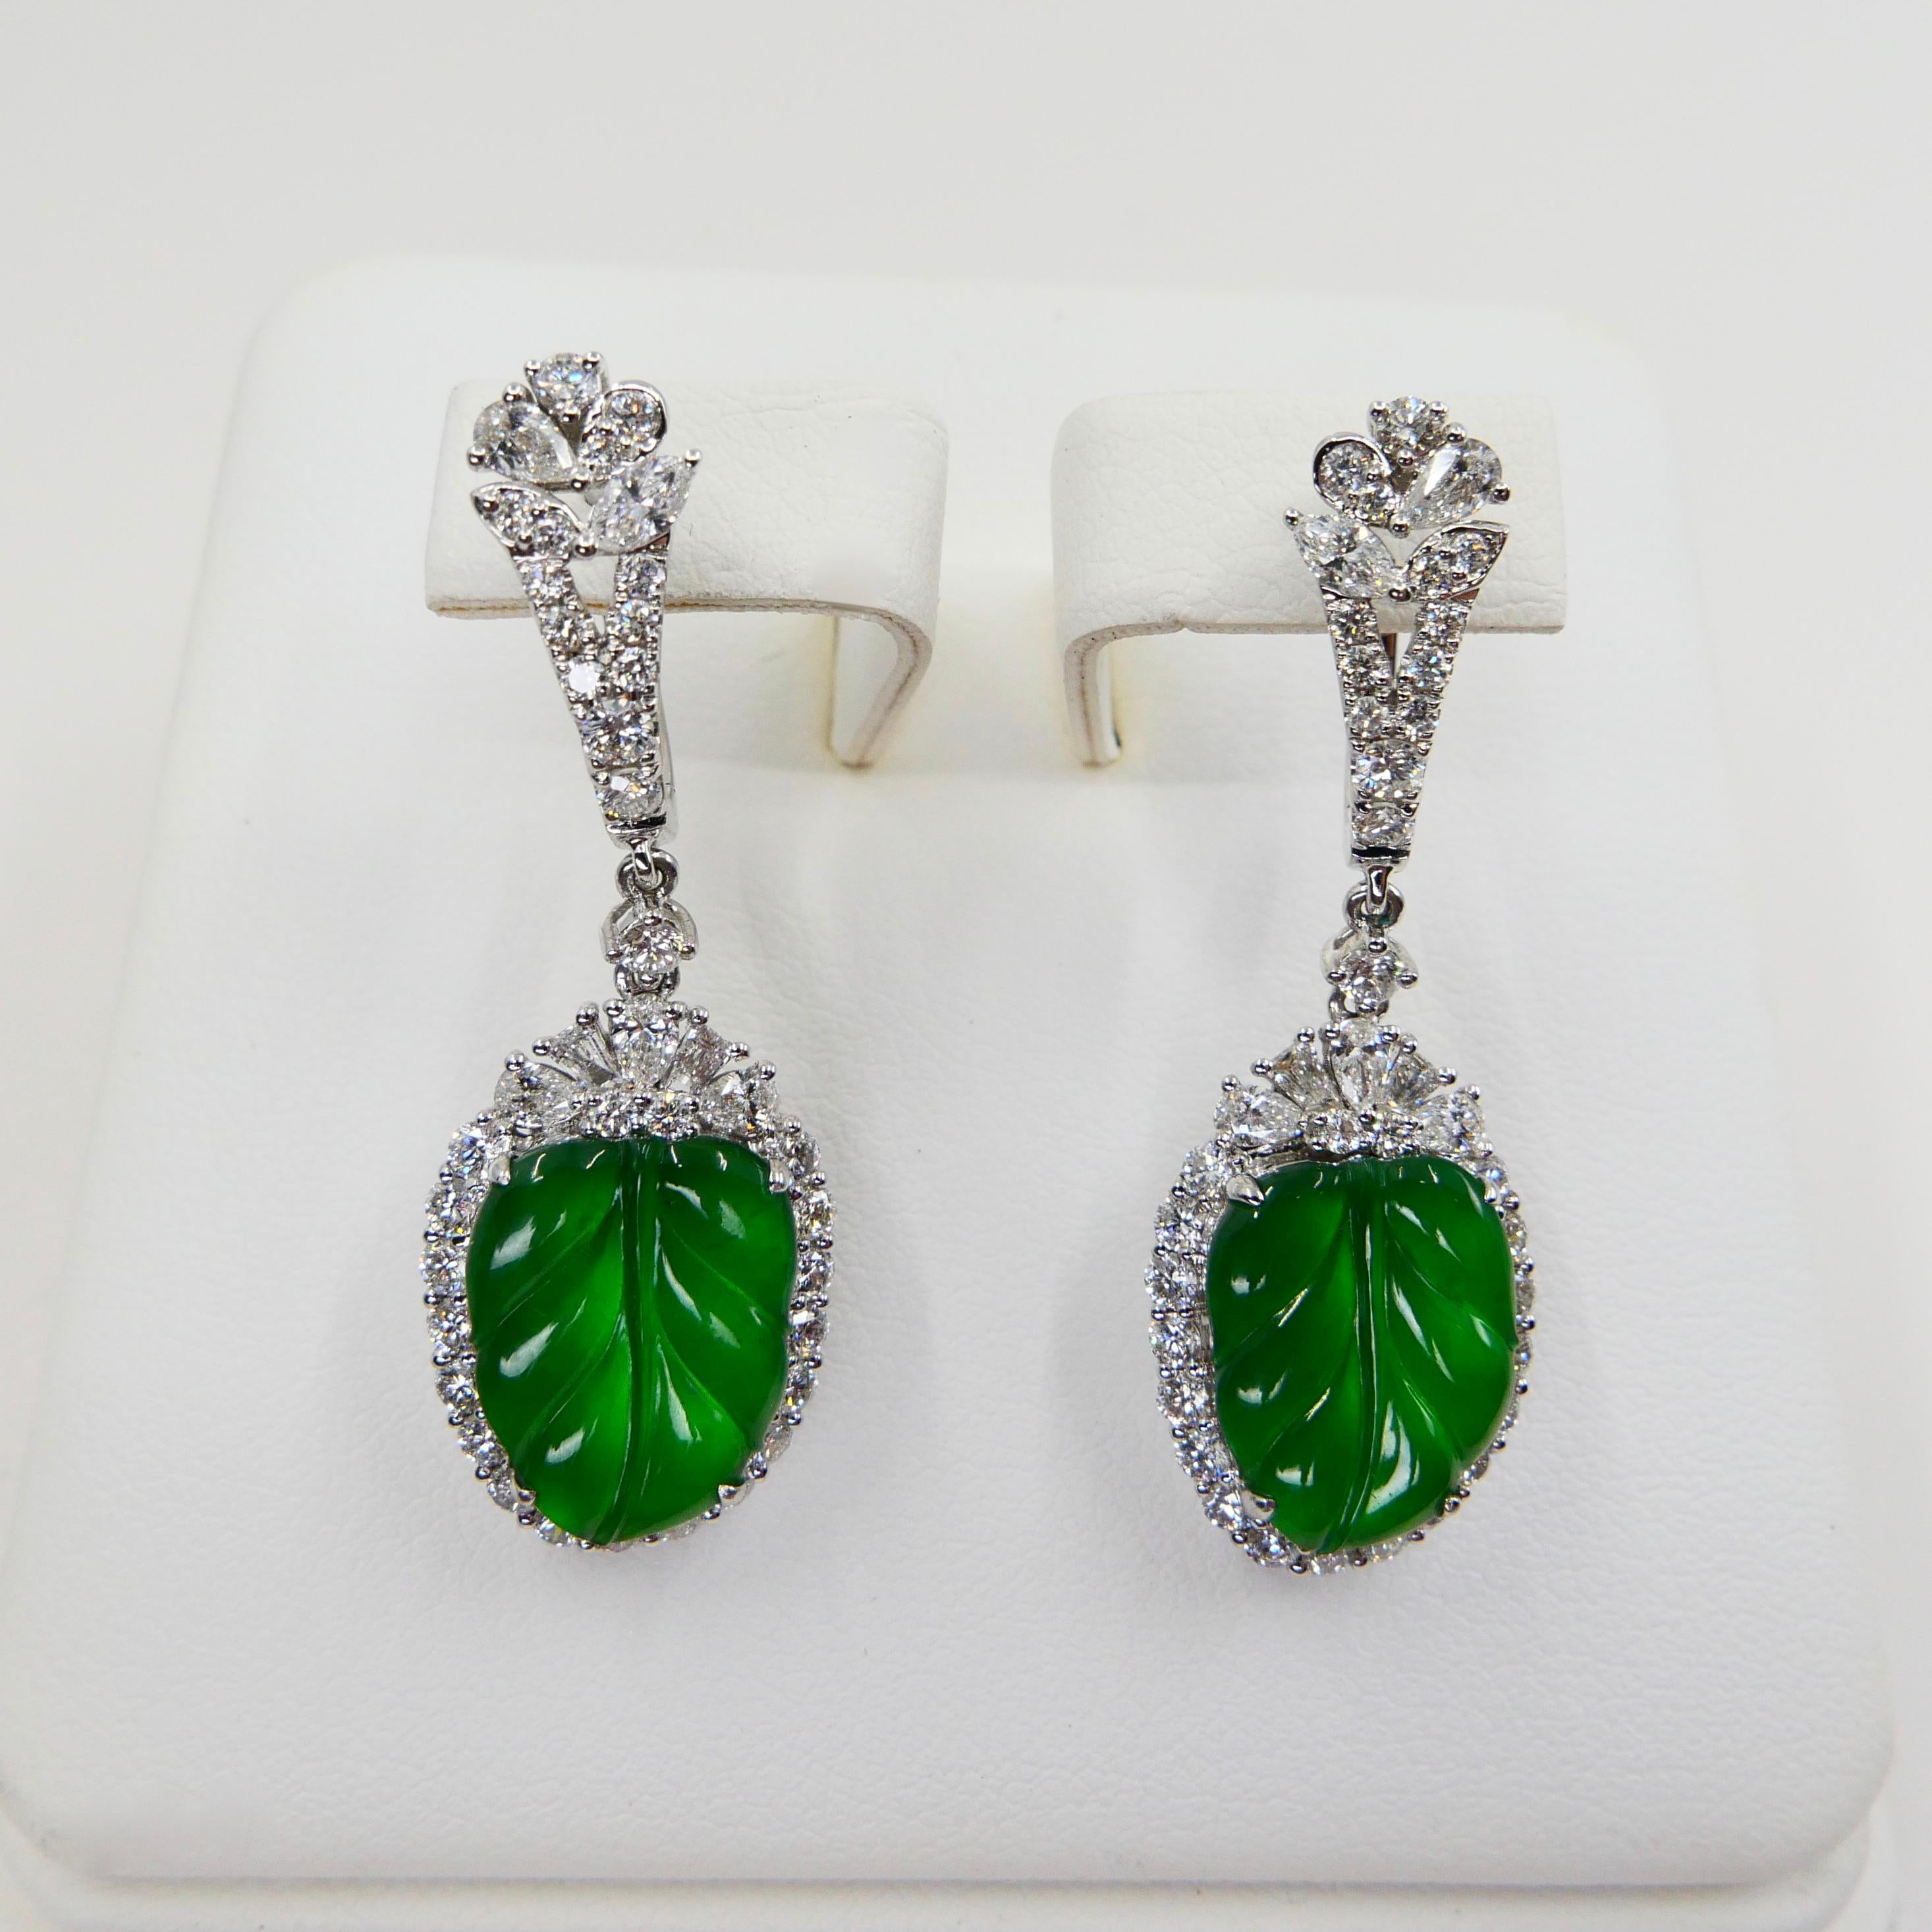 Certified Icy Apple Green Jade and Diamond Earrings, Almost Imperial Green 4